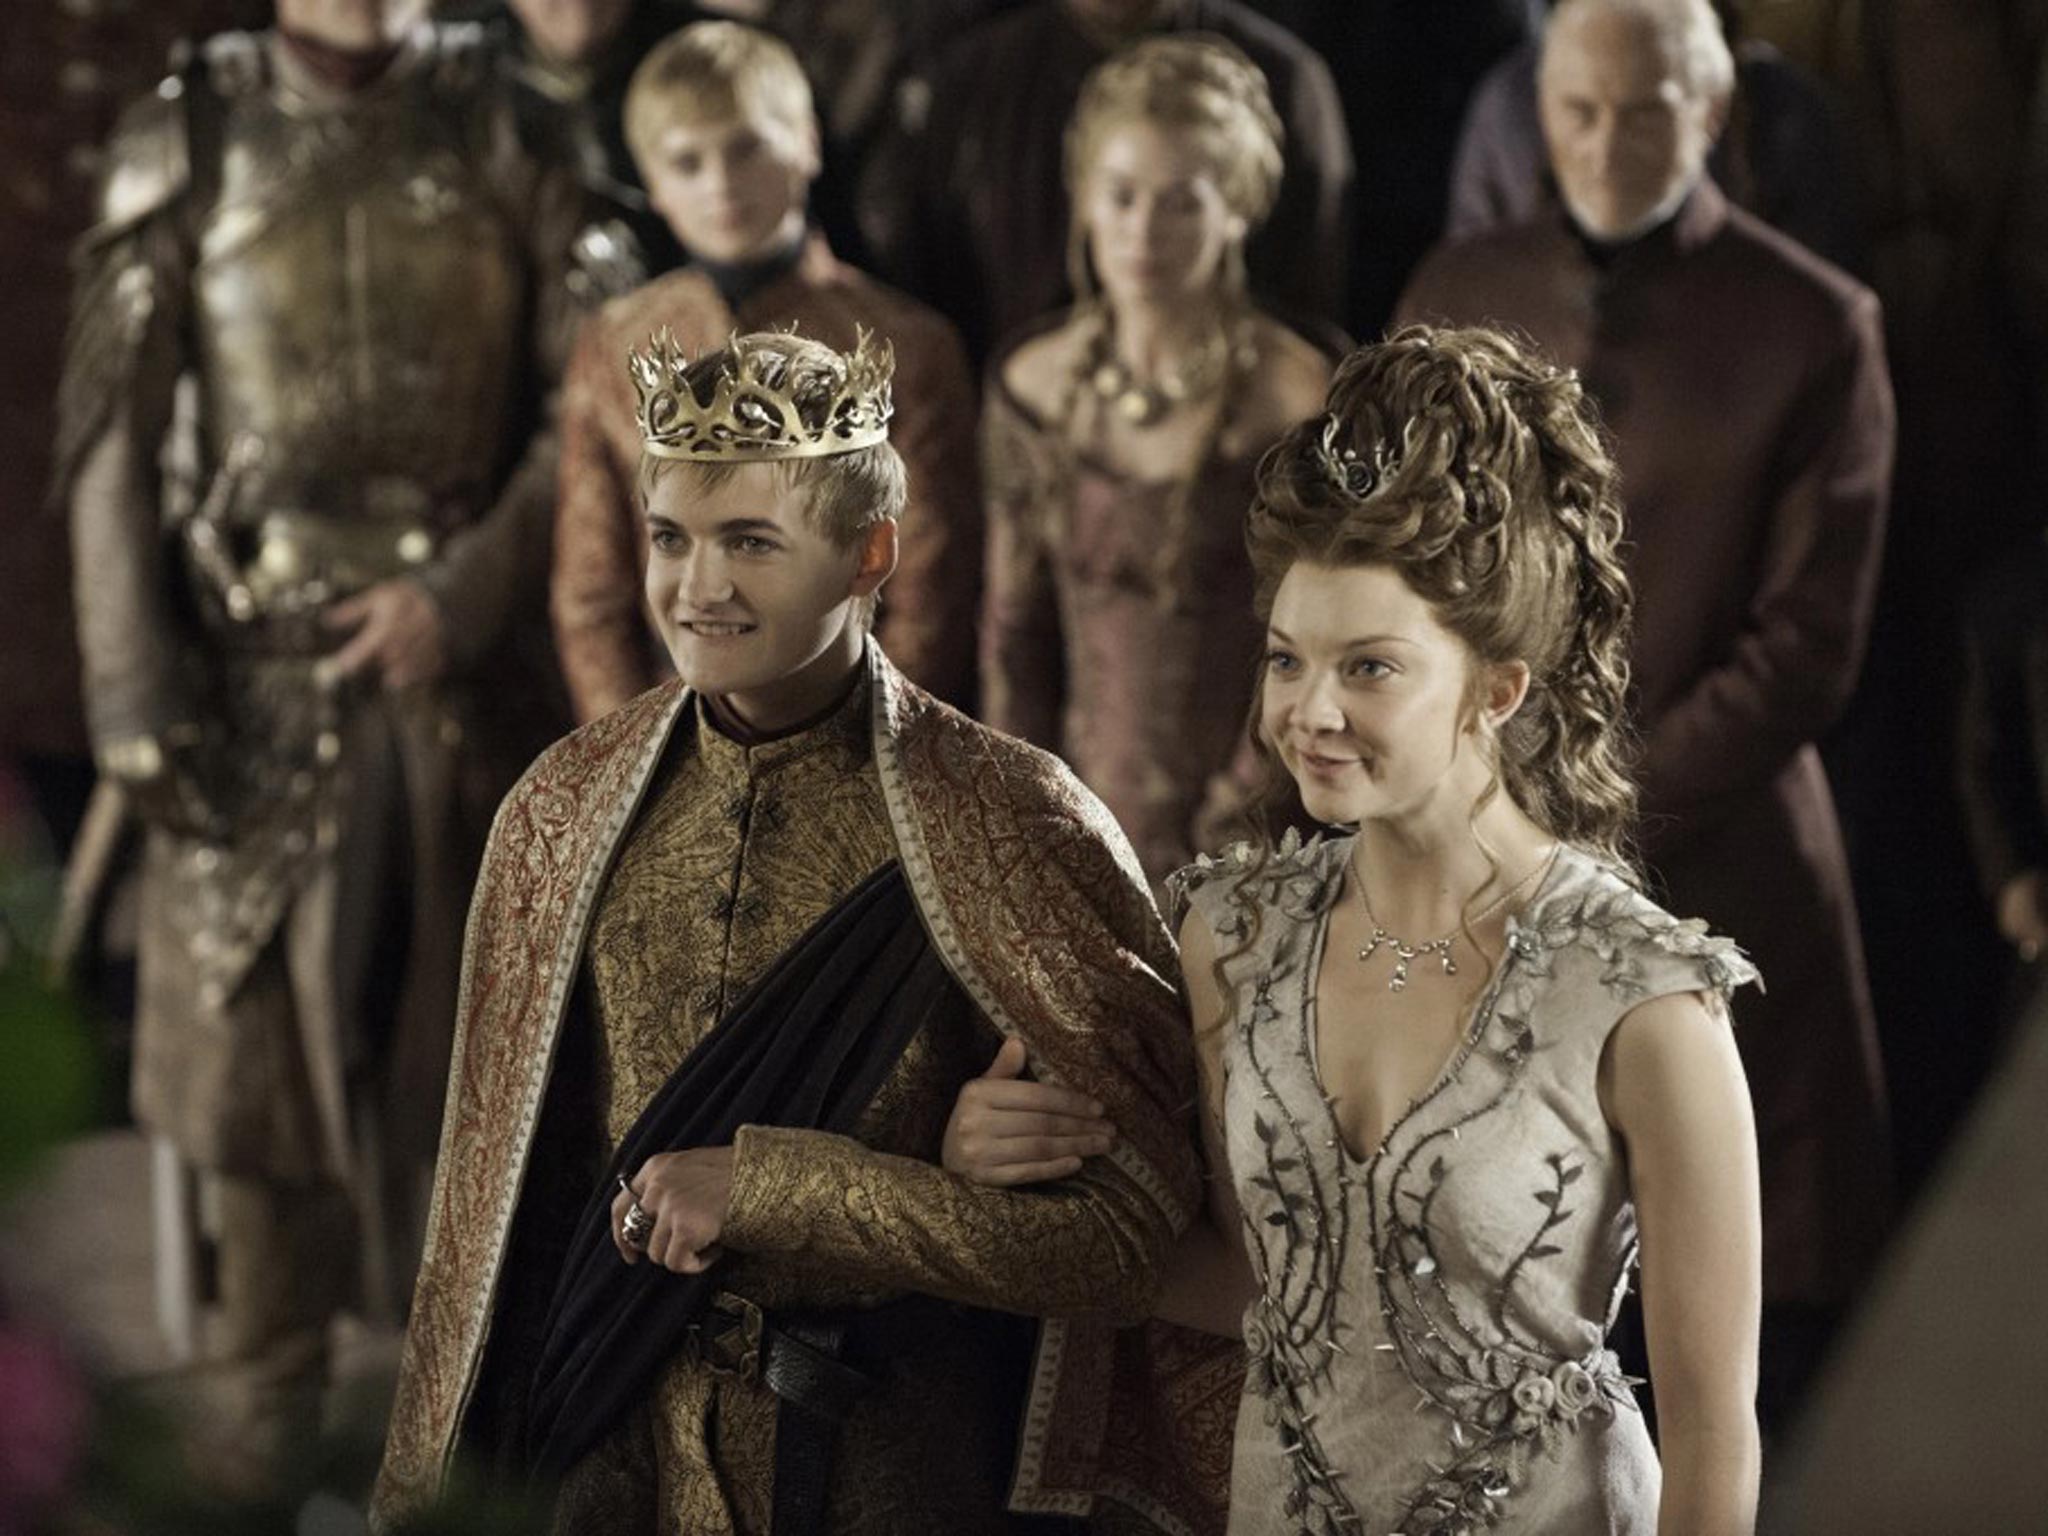 The Purple Wedding: Joffrey and Margaery Tyrell tie the knot